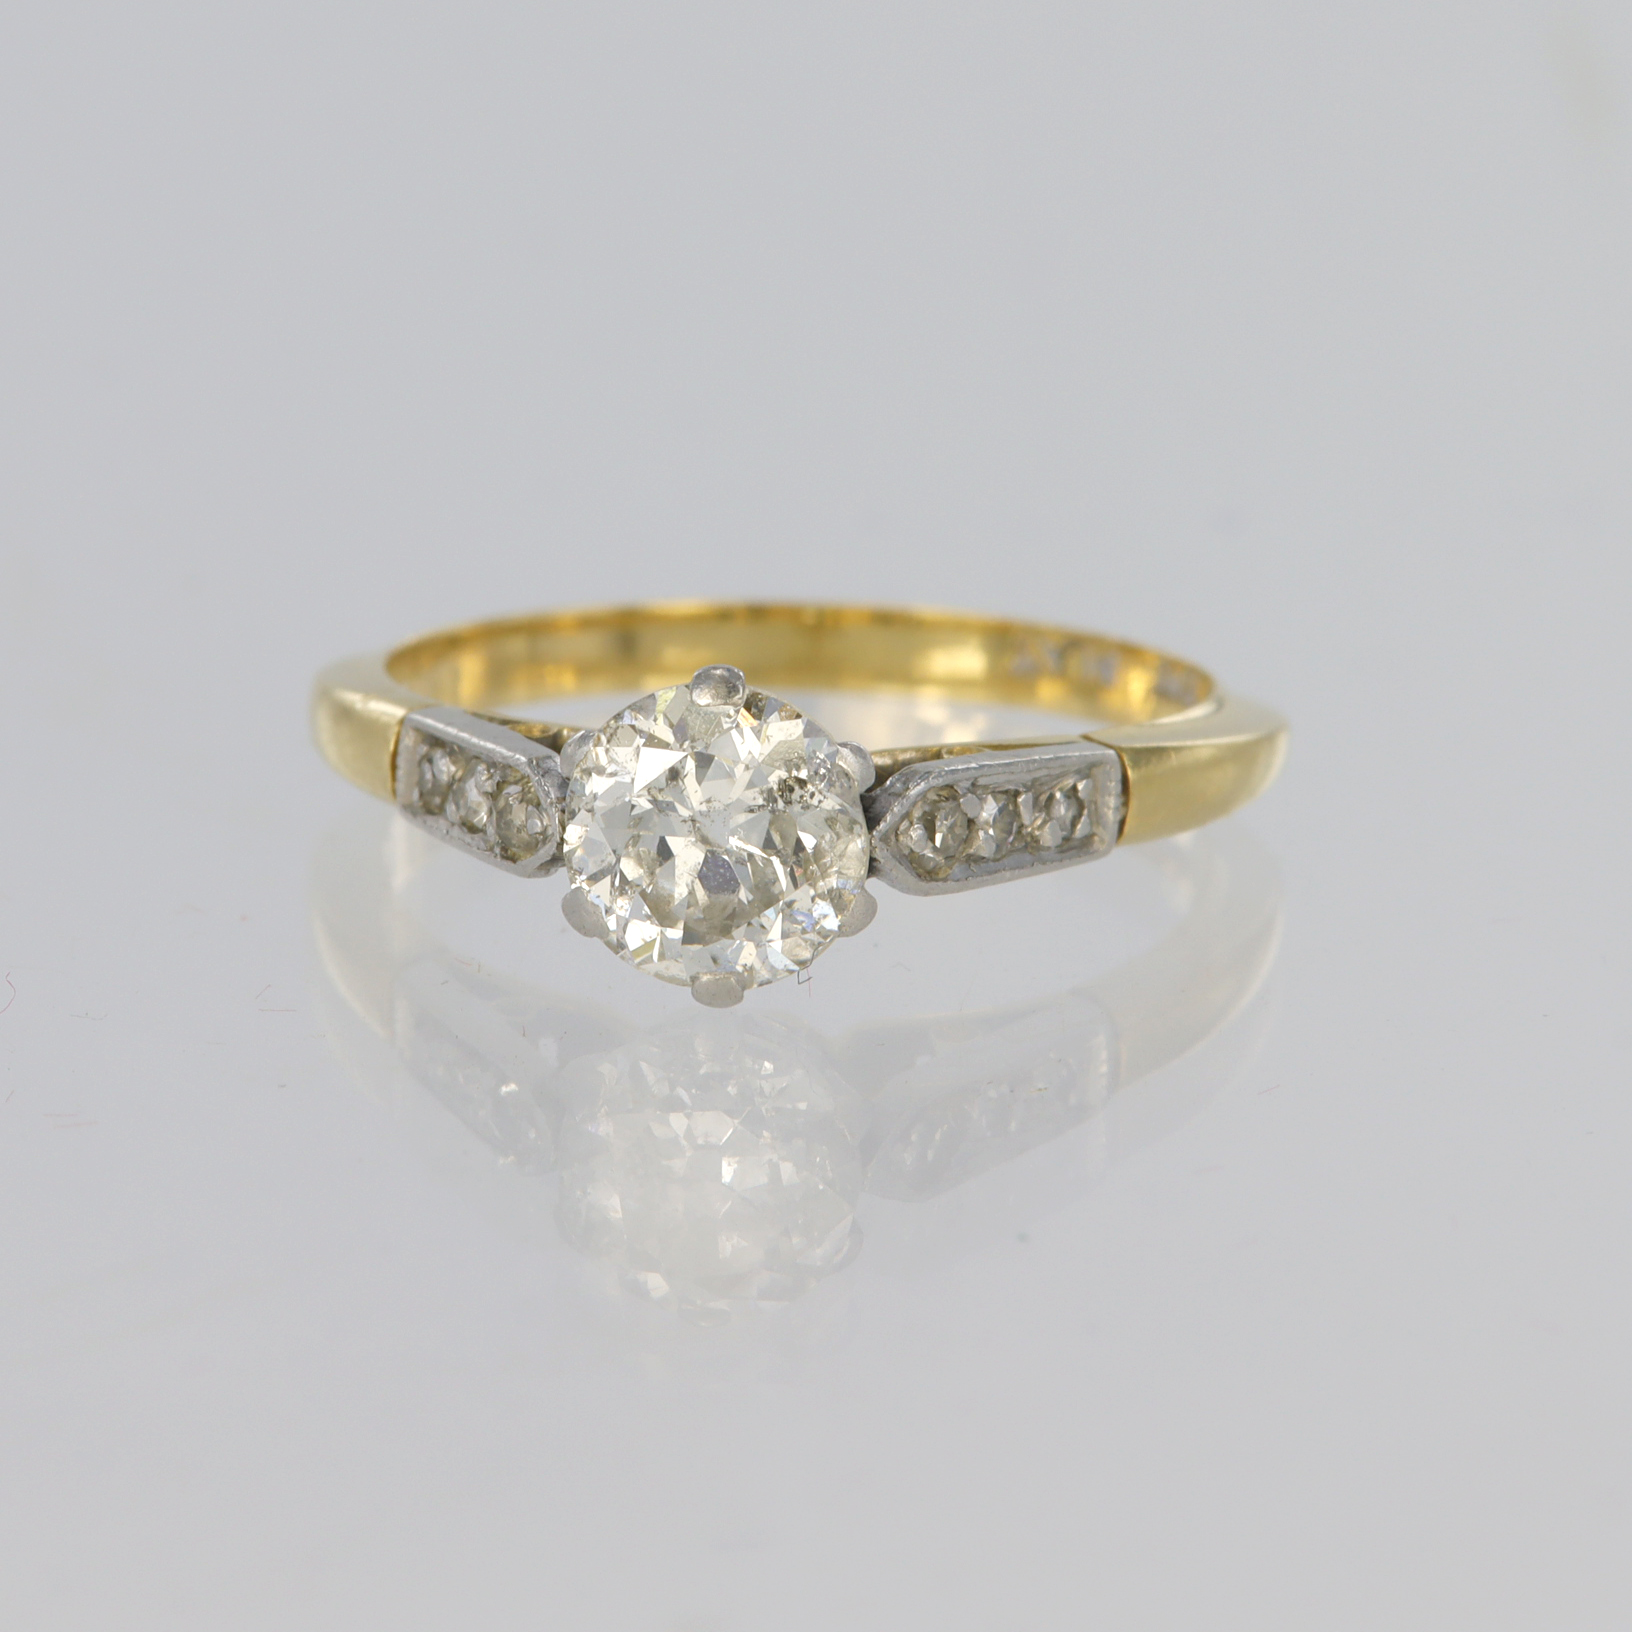 18ct yellow gold and platinum solitaire ring set with round old cut diamond weighing approx. 0.